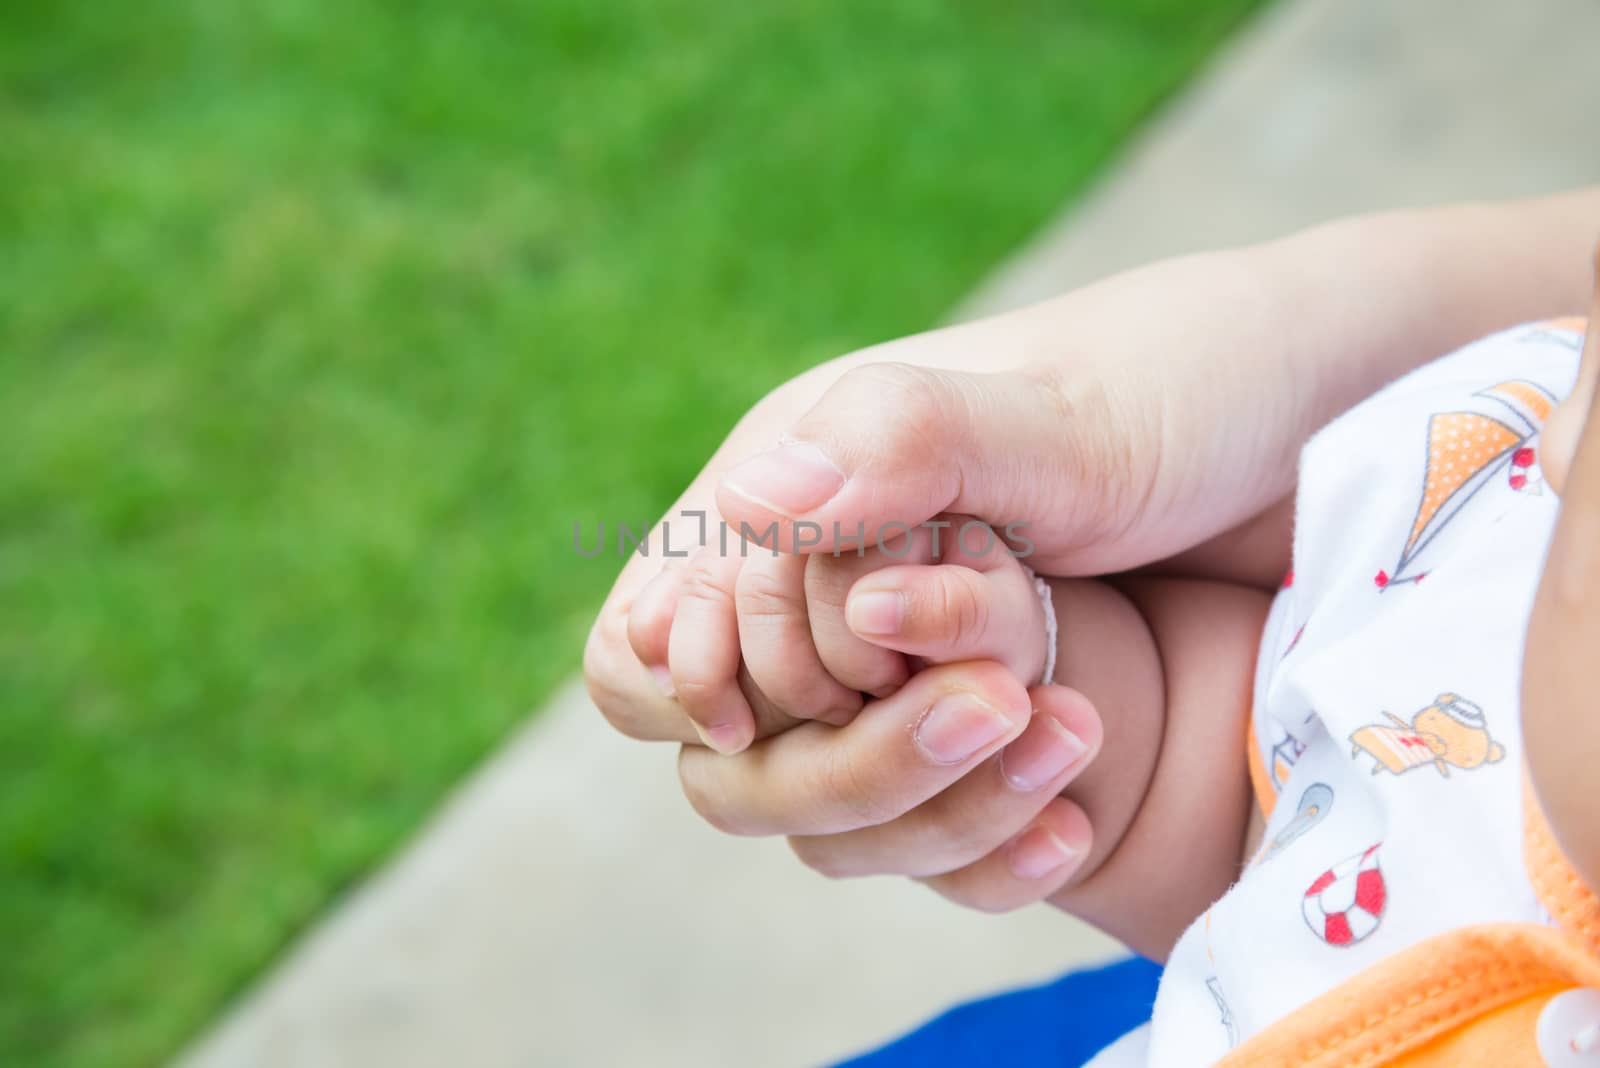 A handful of baby's fingers, concept of love and family,sensitive focus